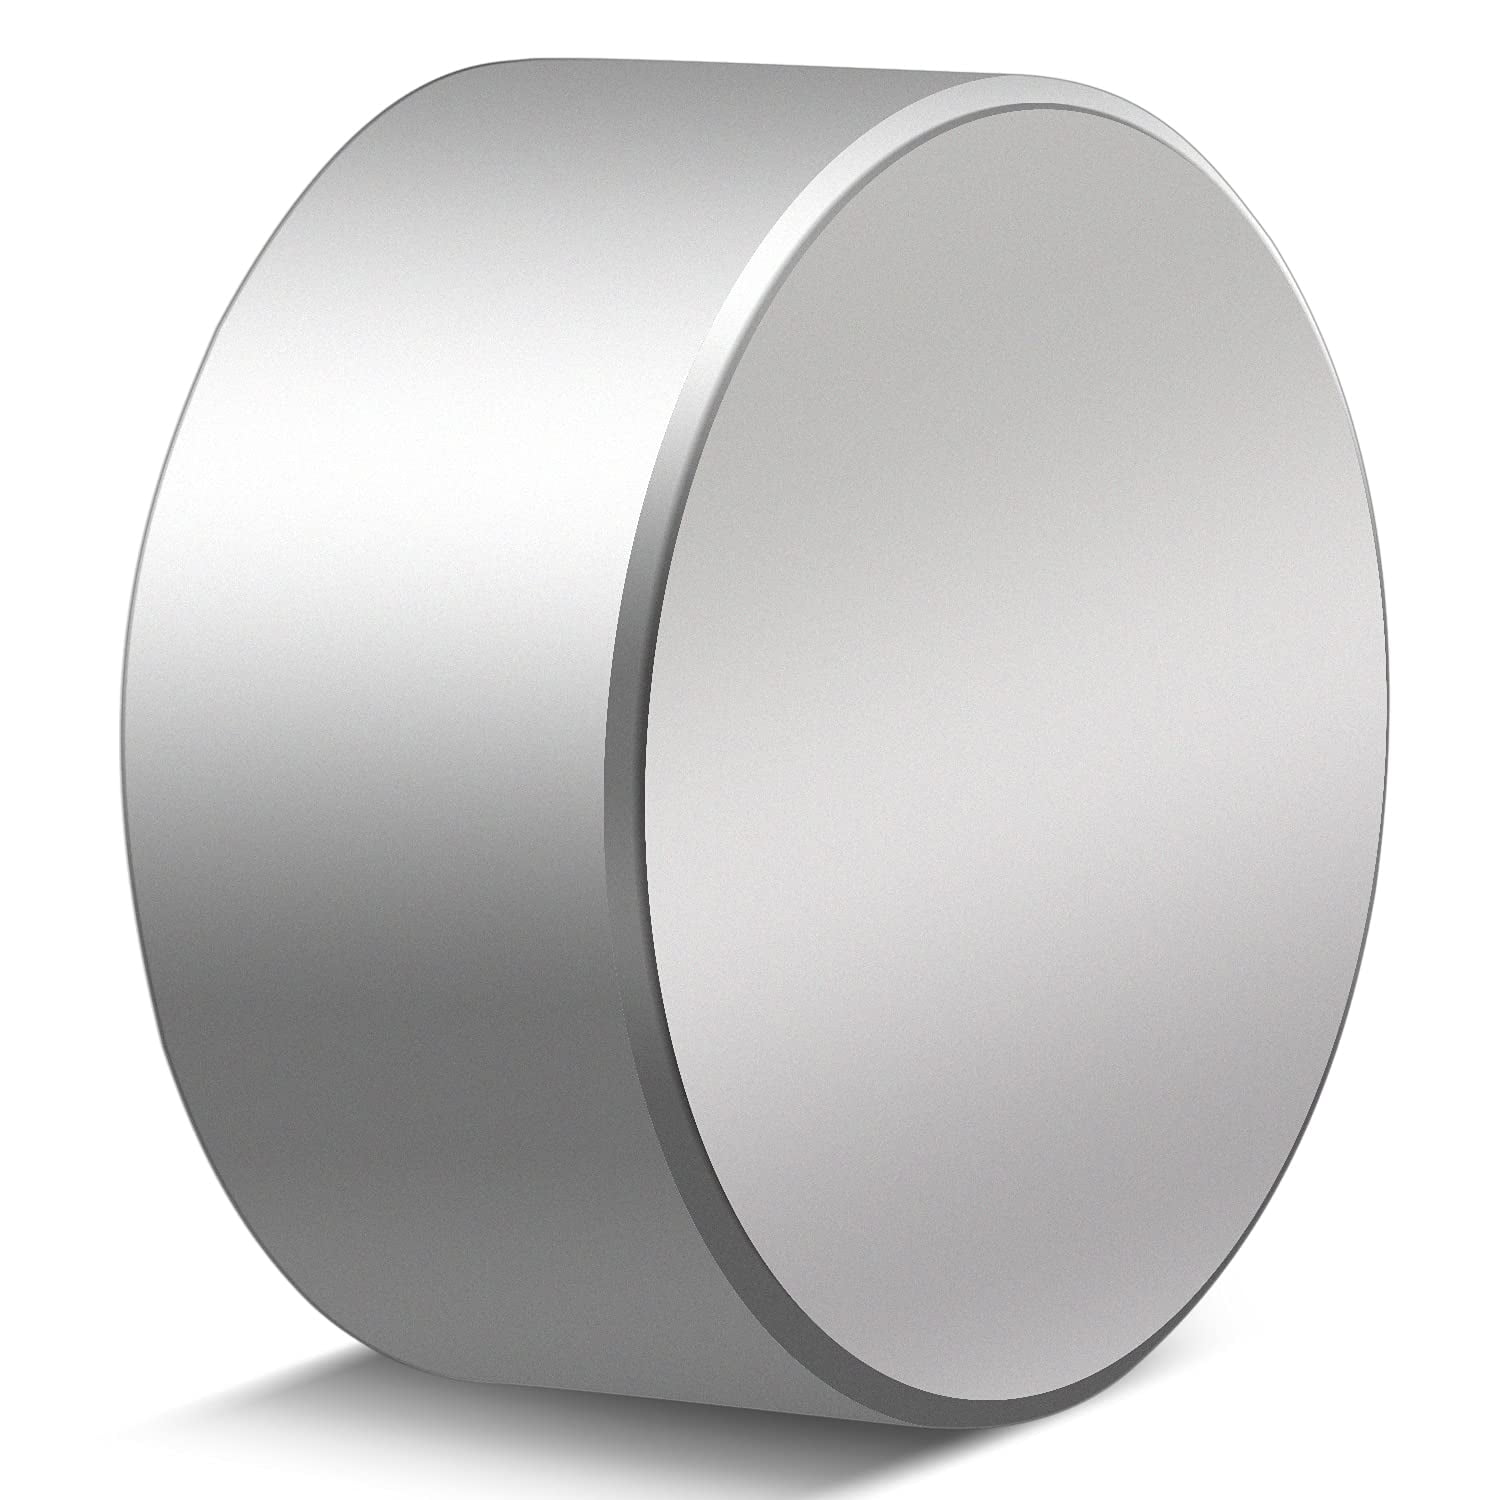 Dia 6mm Powerful Small Round Neodymium Magnet - Magnets By HSMAG